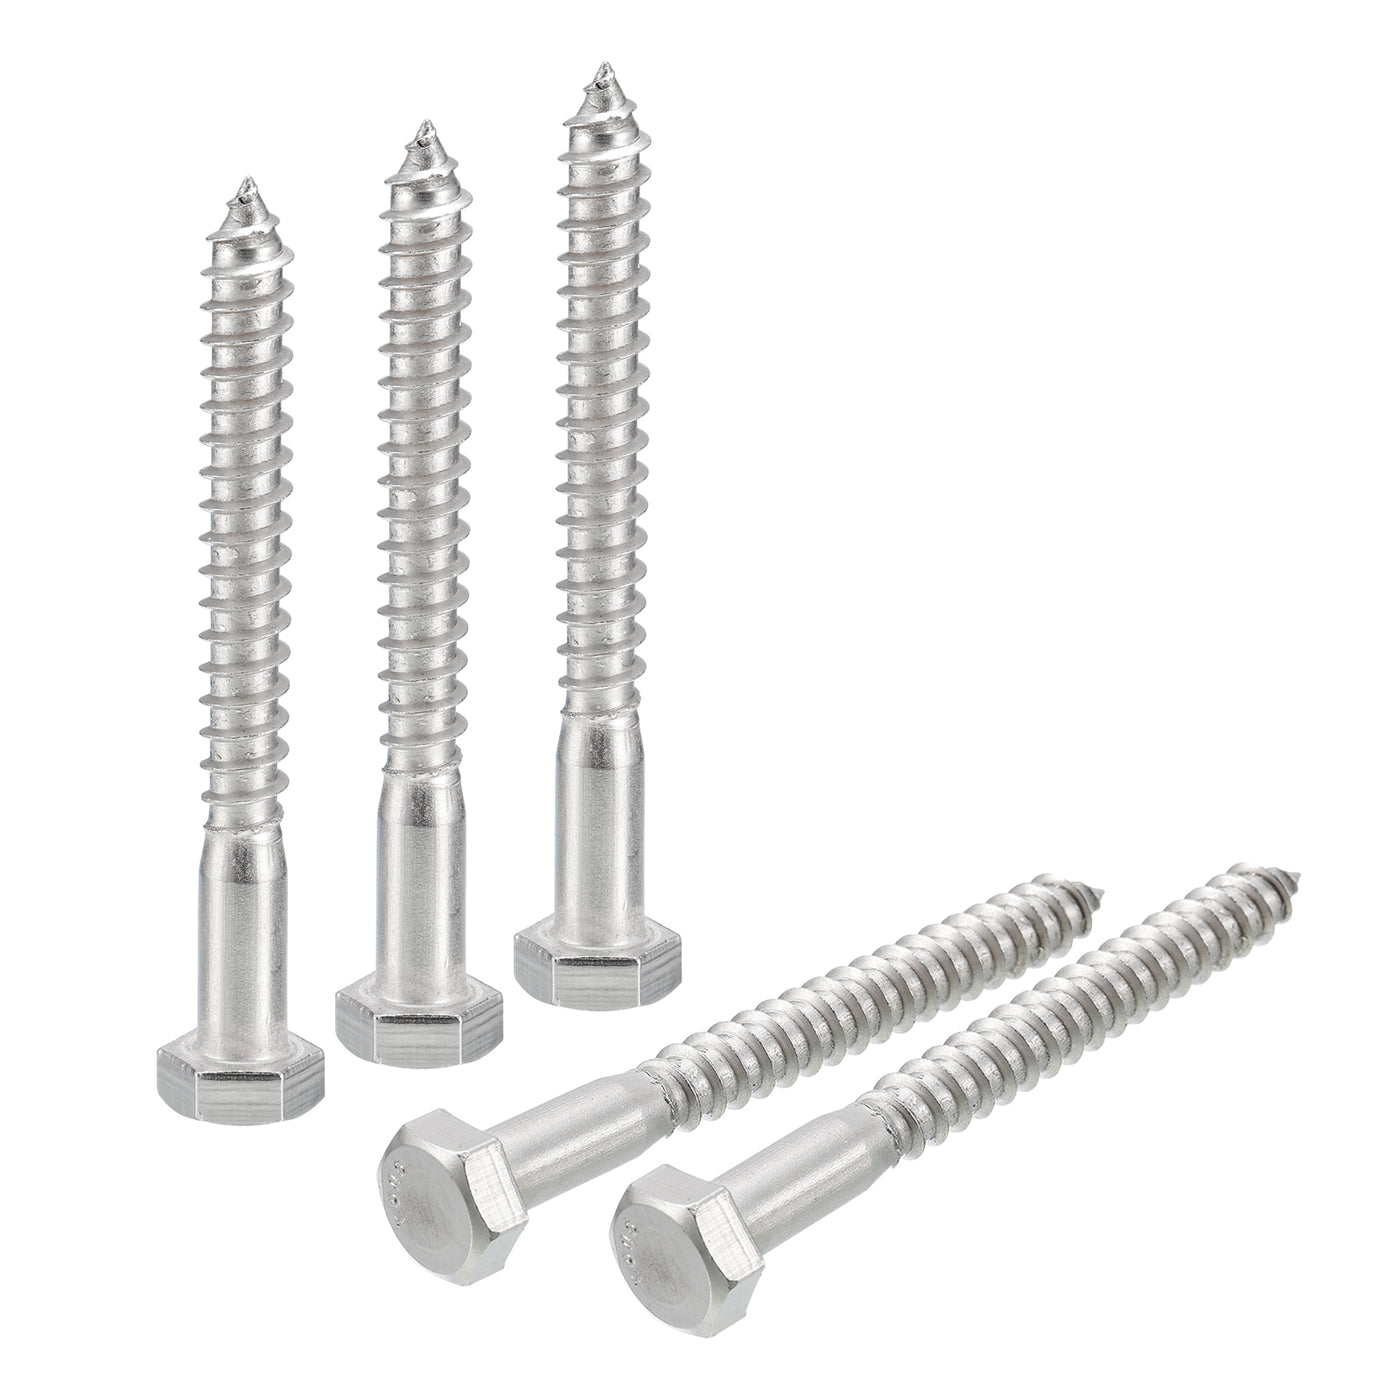 uxcell Uxcell Hex Head Lag Screws Bolts, 10pcs 5/16" x 3" 304 Stainless Steel Wood Screws